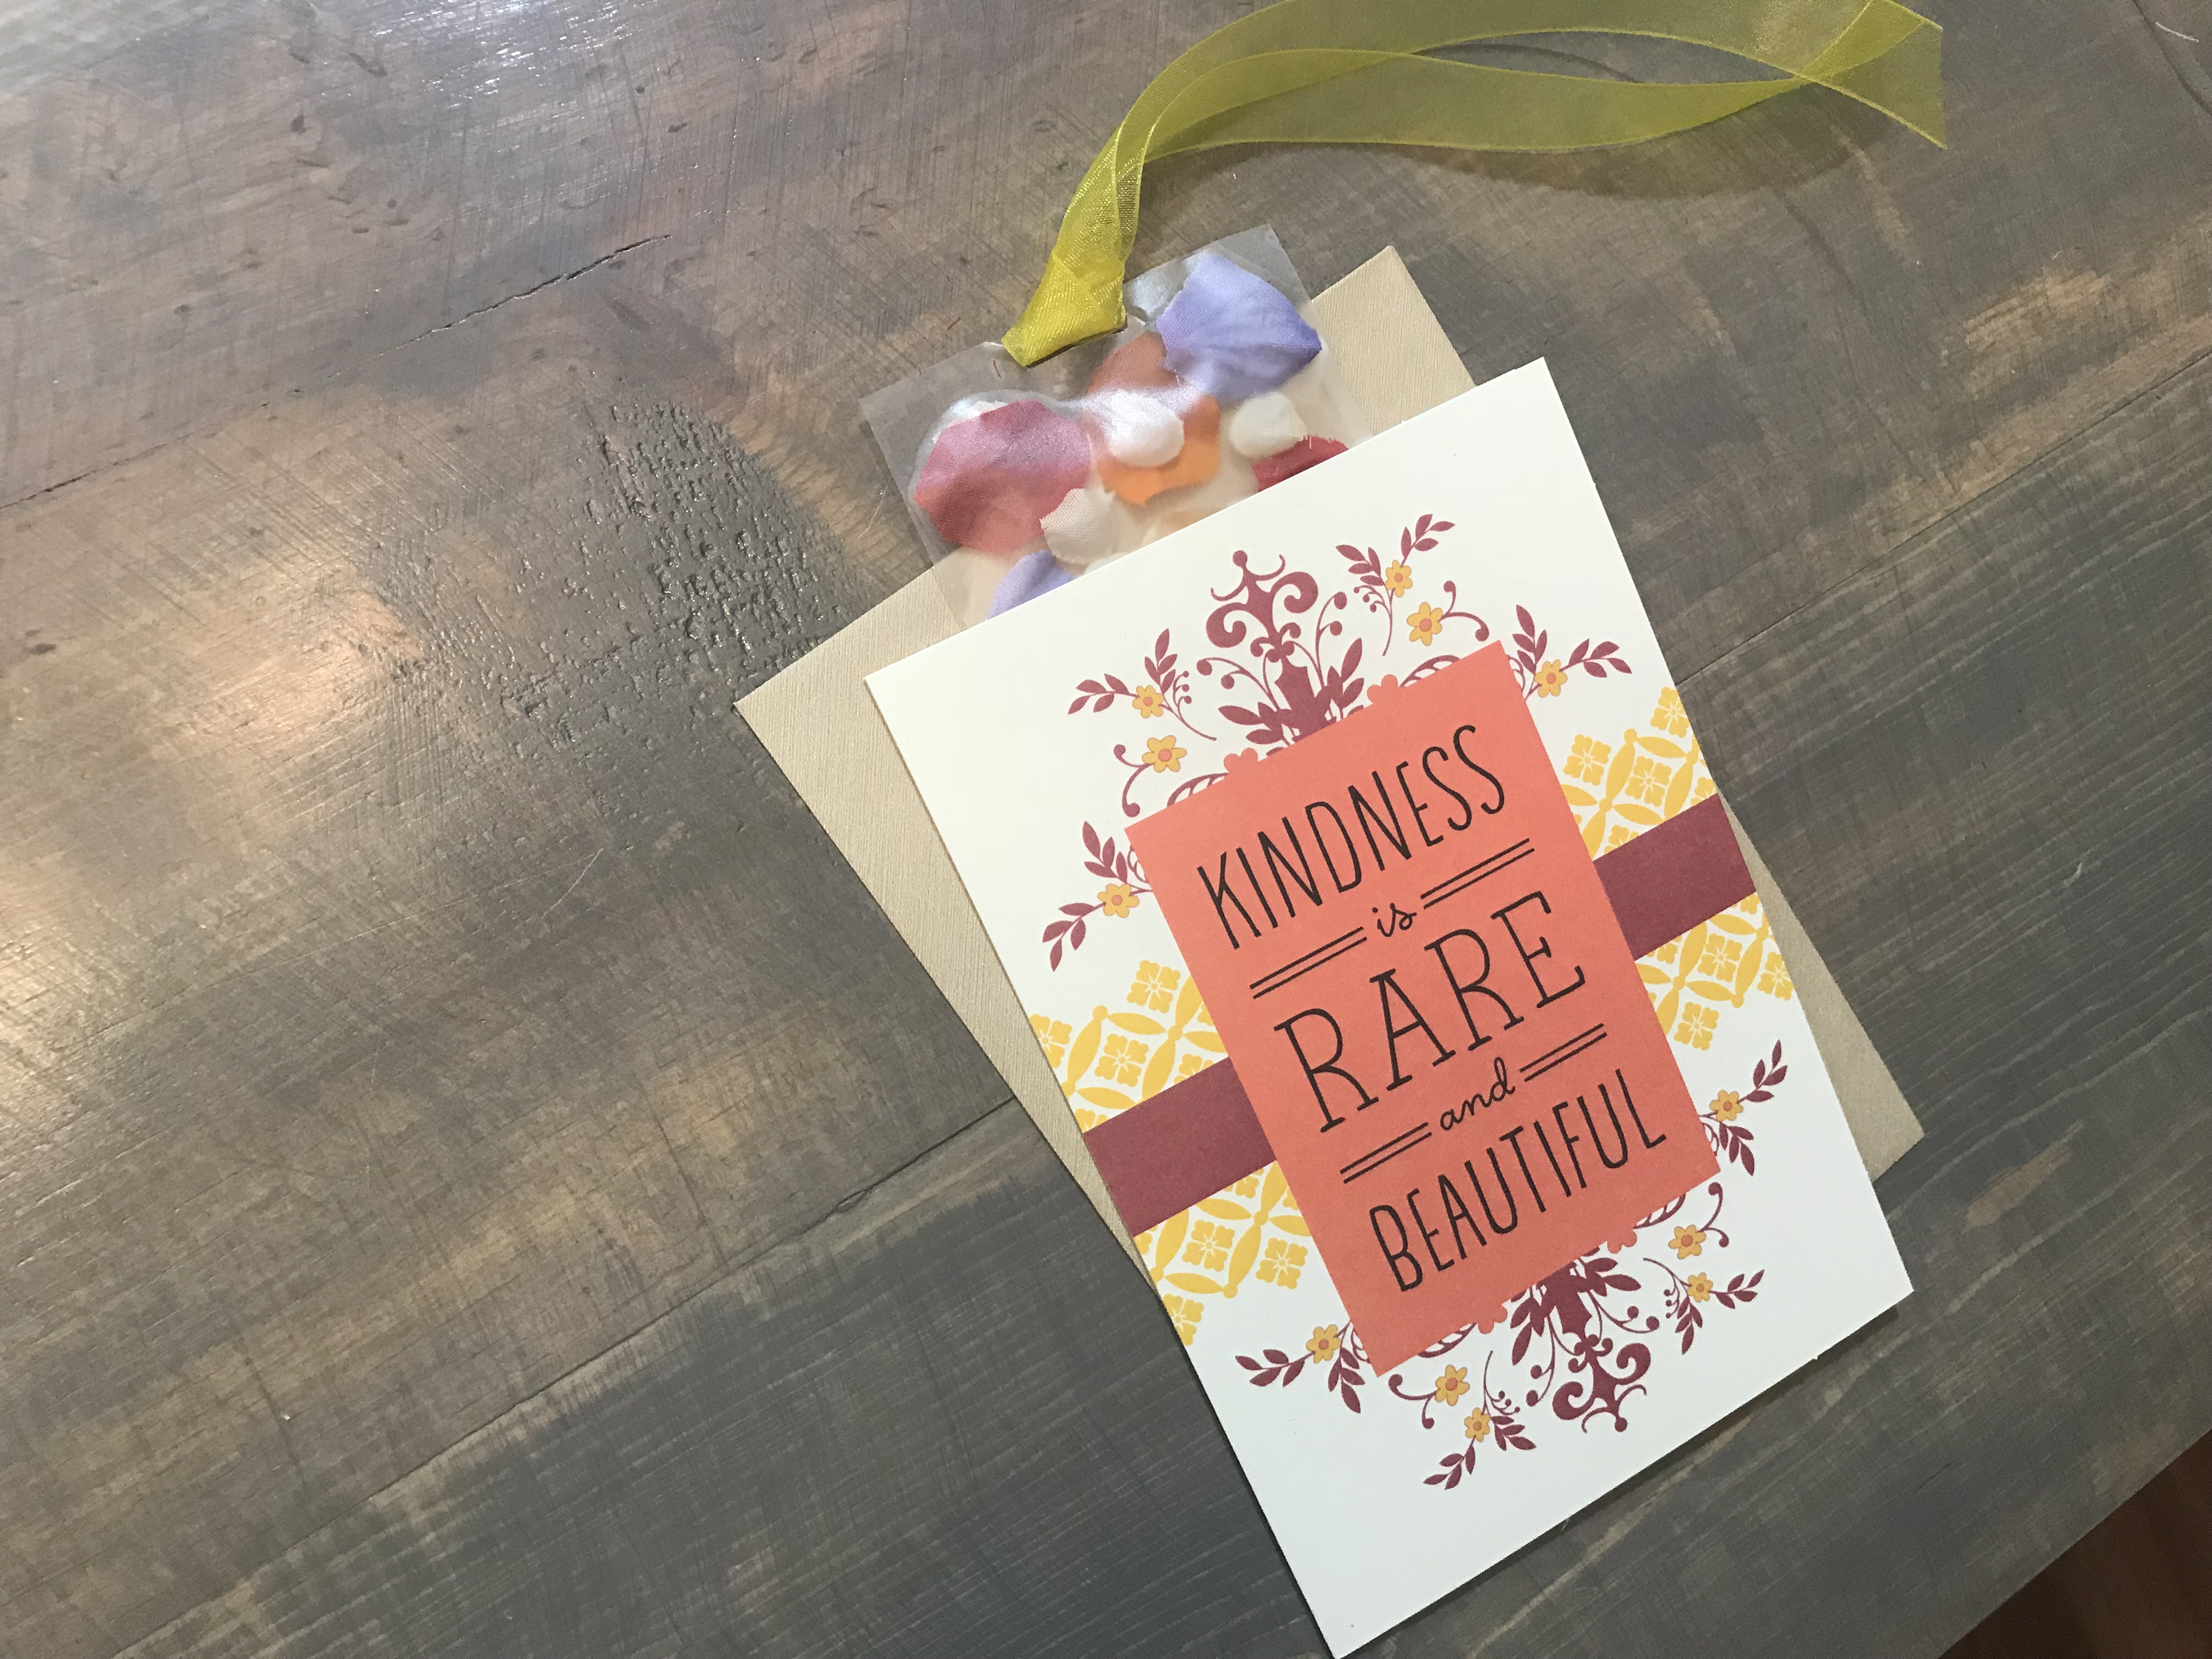 Kindness is rare and beautiful card with pressed flowers bookmark.